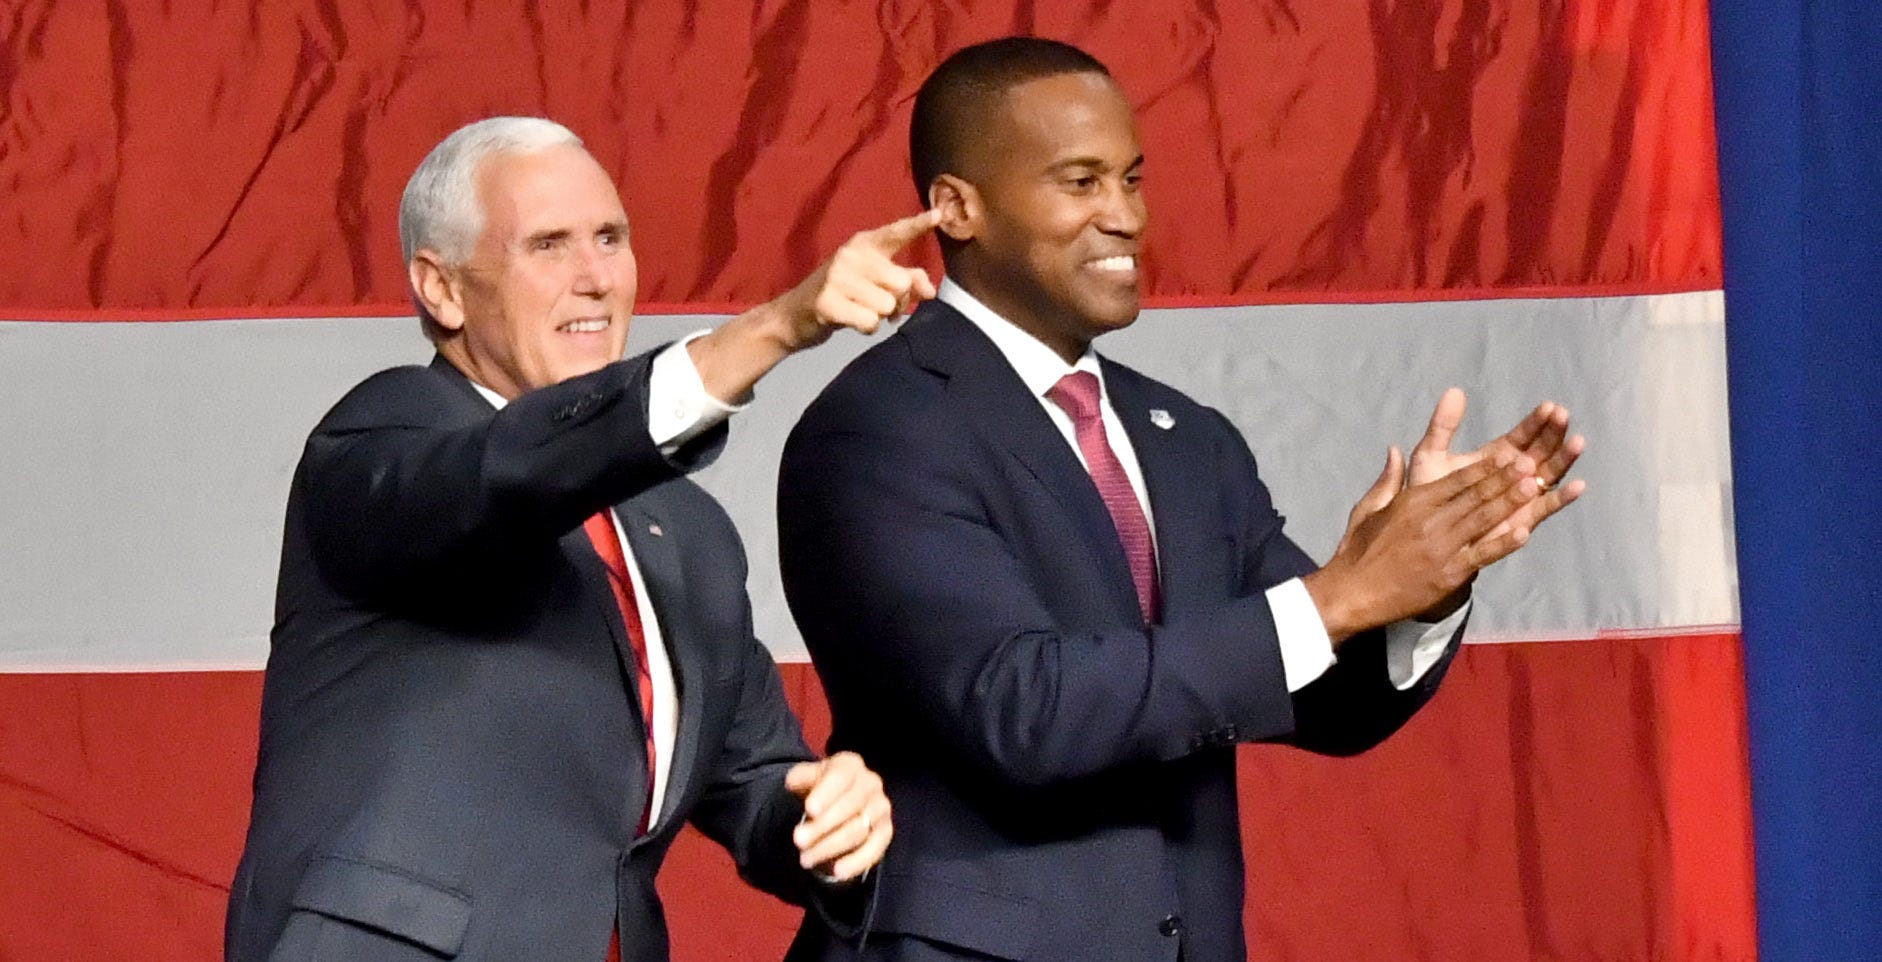 John James and Vice President Mike Pence campaign together.